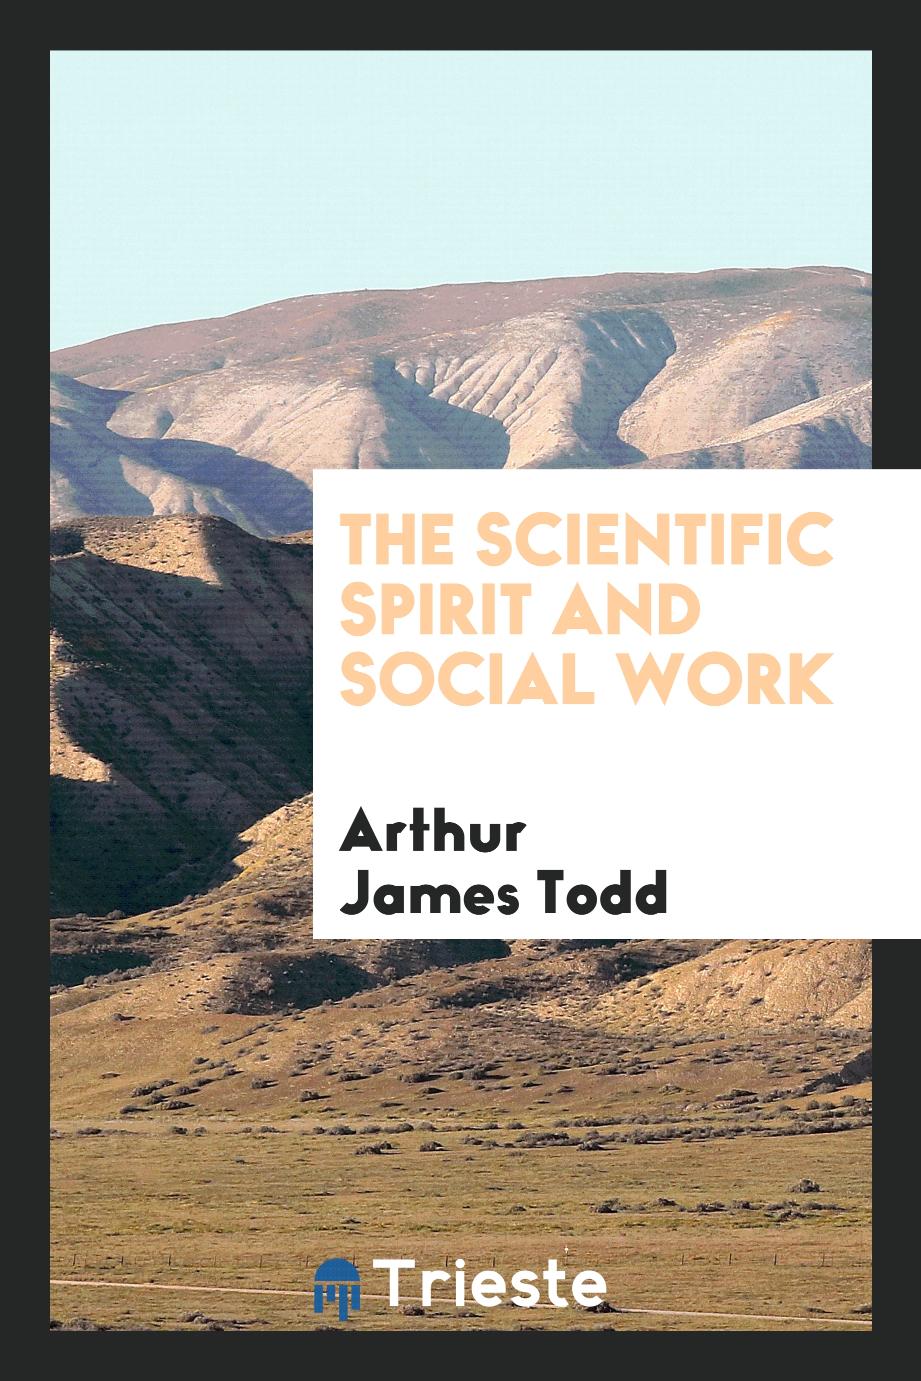 The scientific spirit and social work